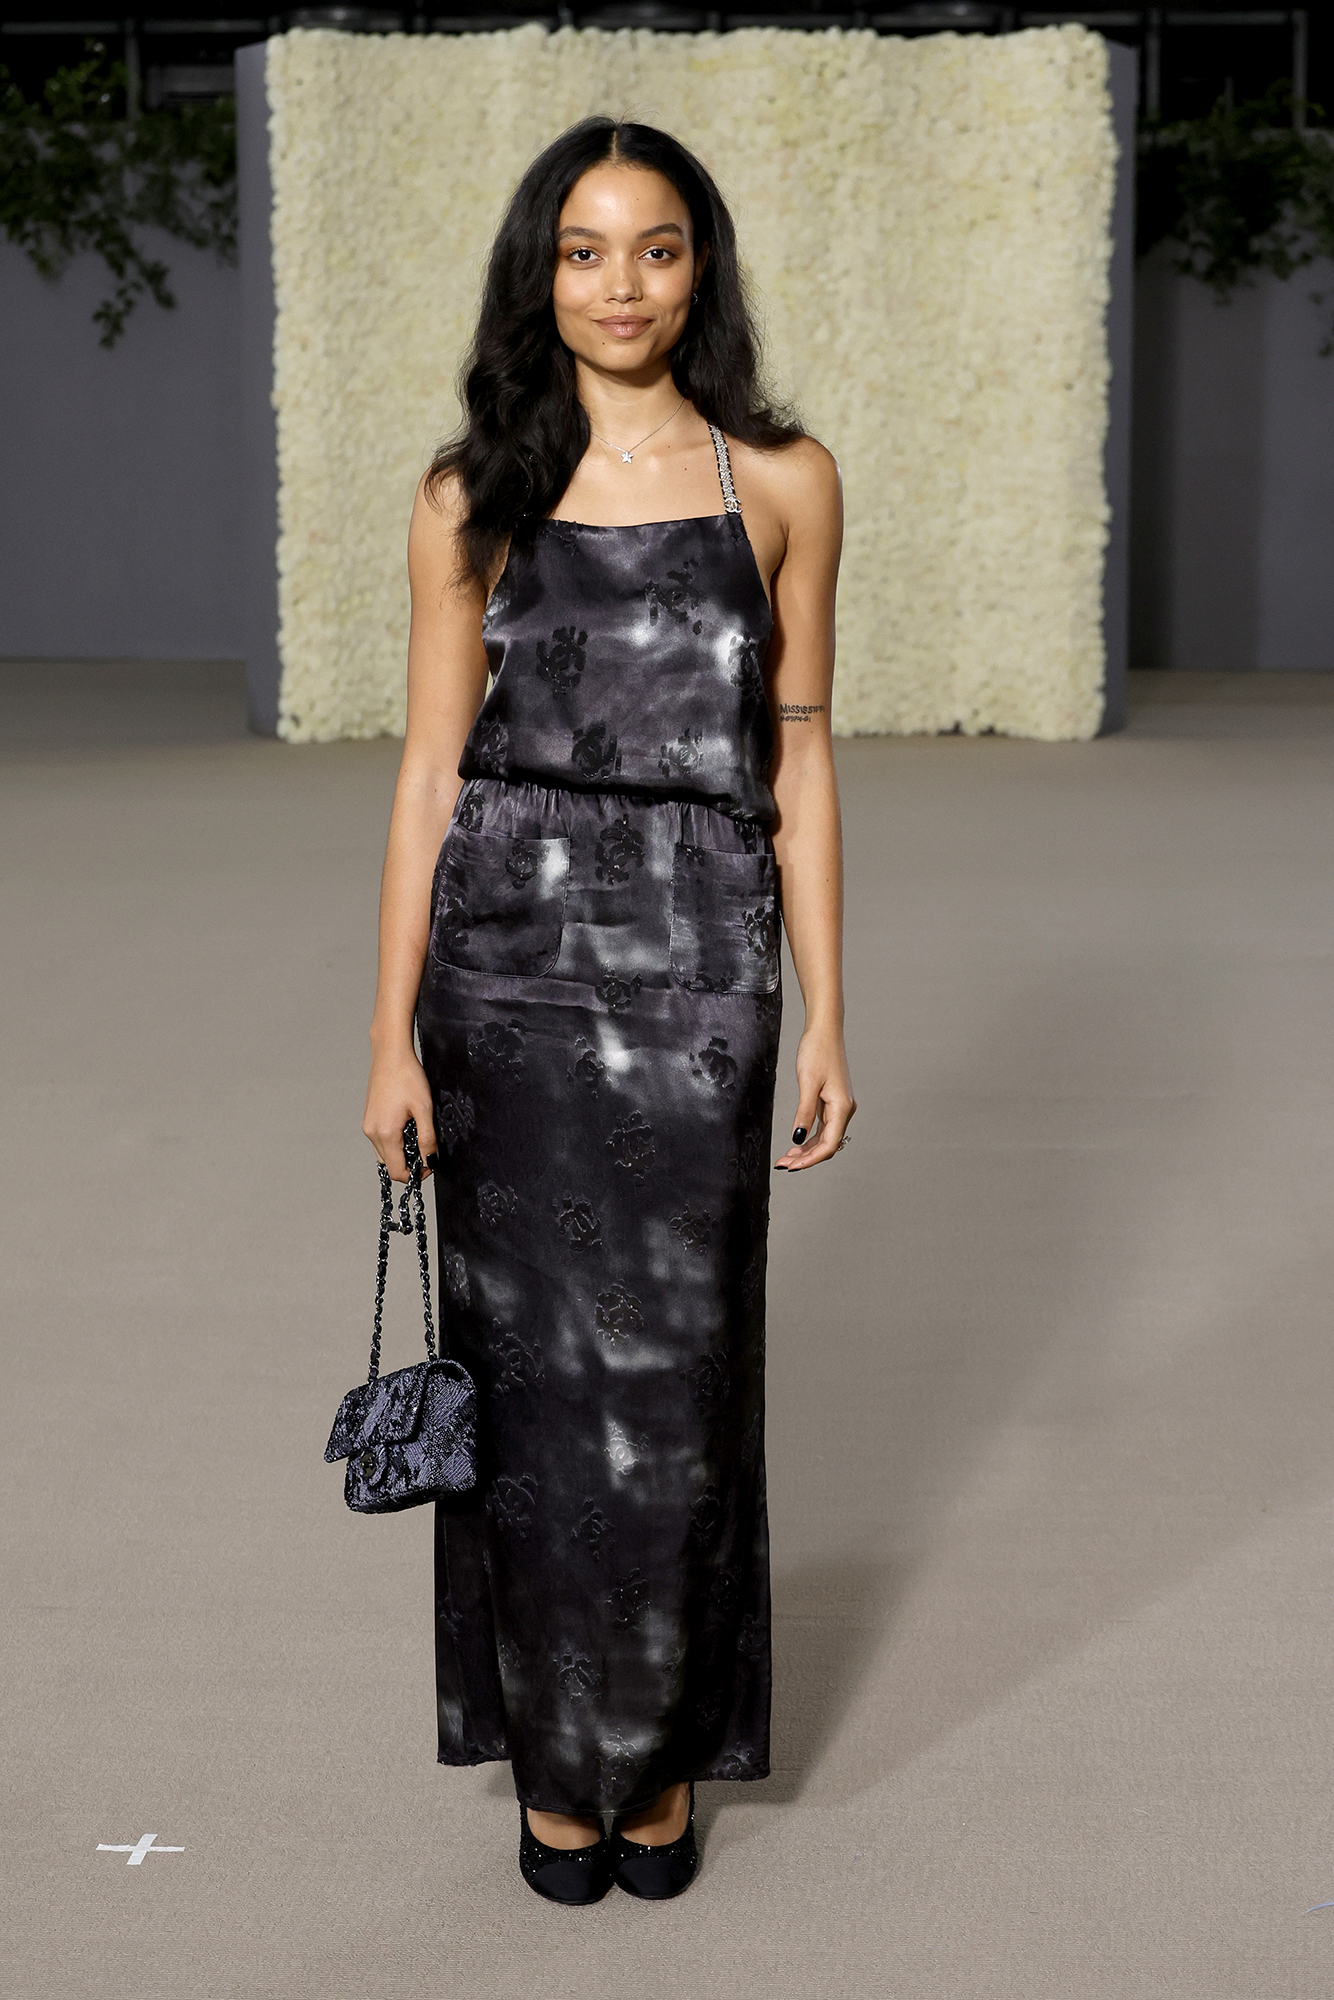 Whitney Peak wears Chanel at the Academy Museum Gala 2022.